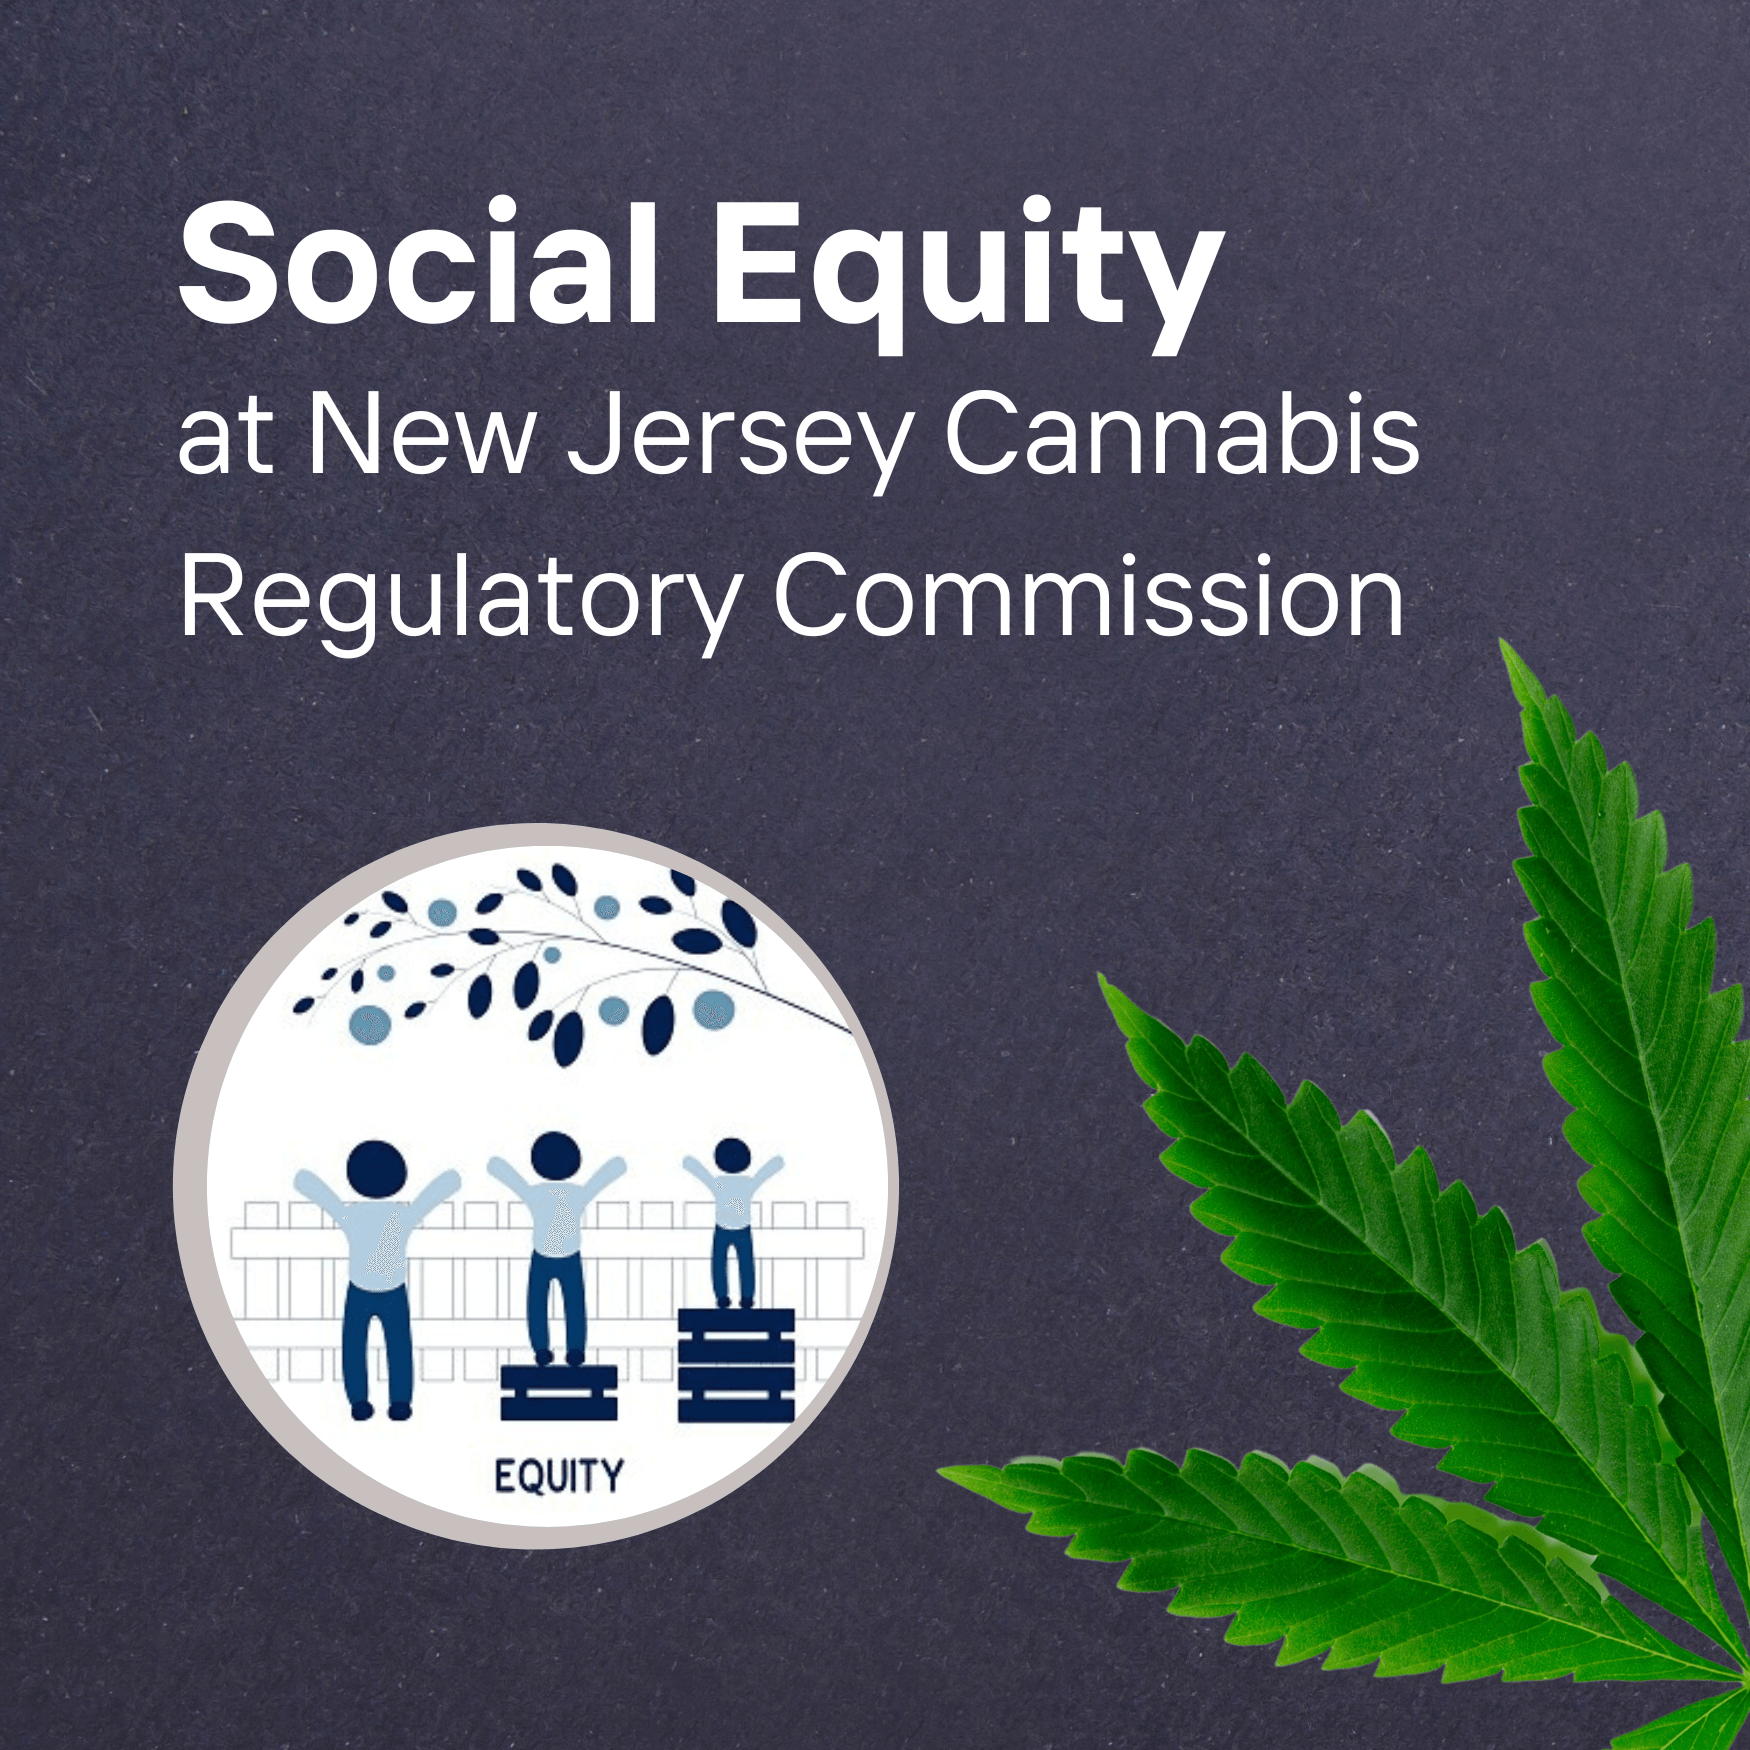 Social Equity at the NJ Cannabis Regulatory Commission